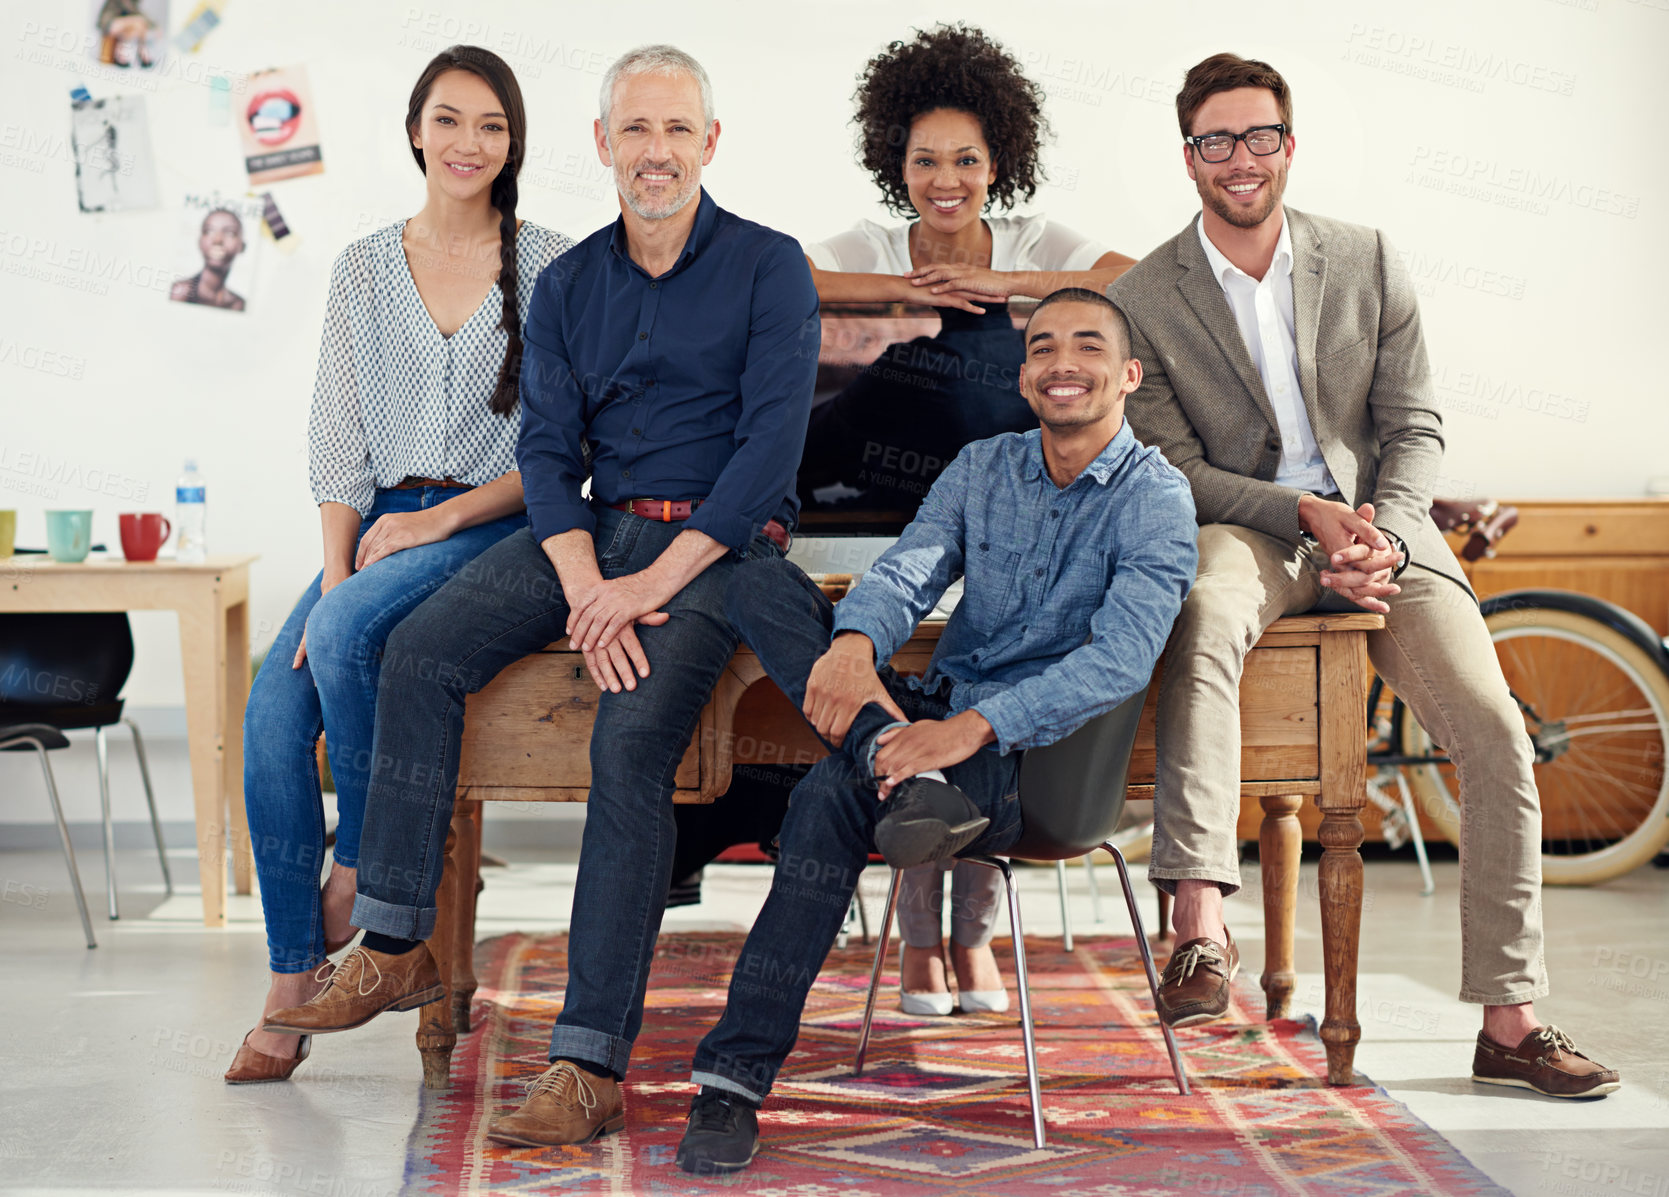 Buy stock photo Shot of a group of creative professionals working in an office